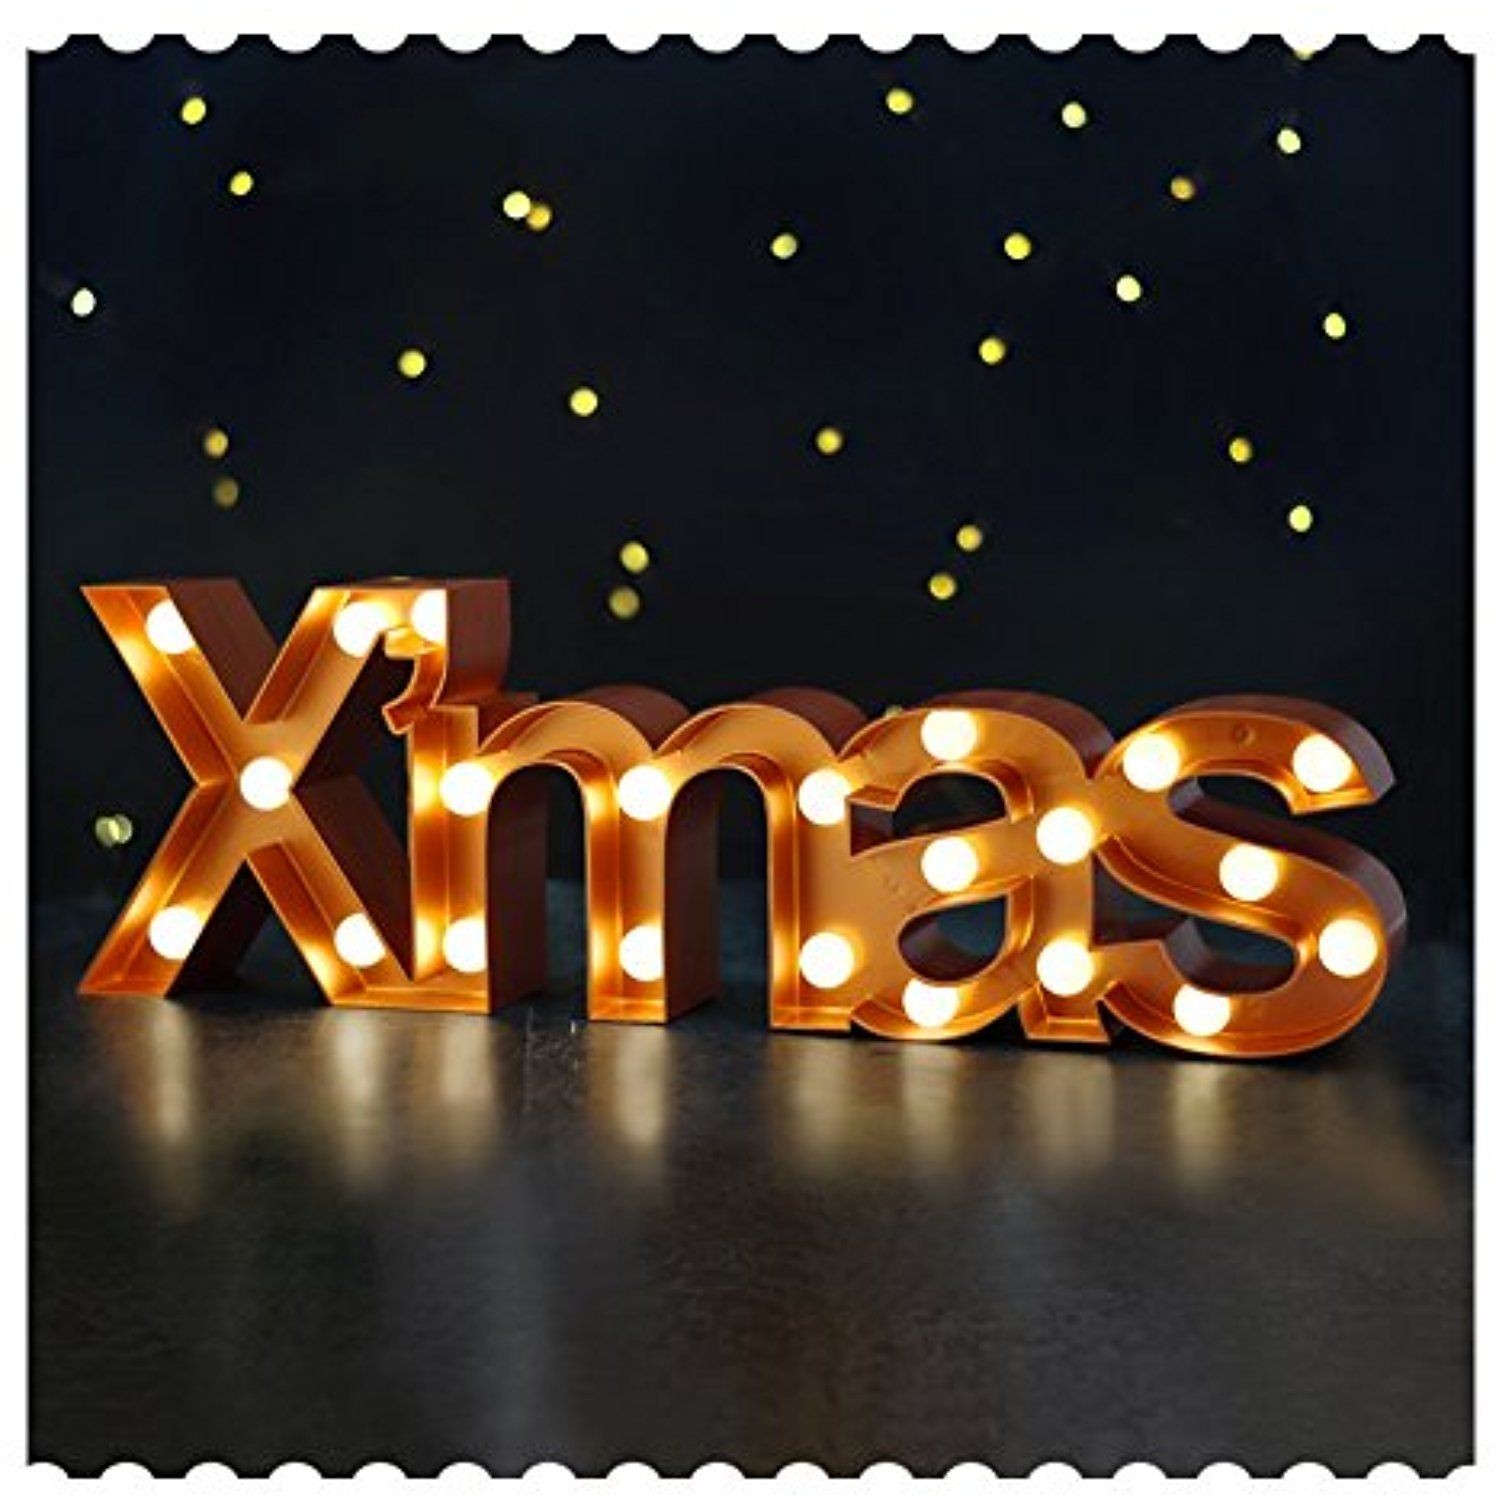 BRIGHT ZEAL 5 5" TALL "XMAS" Christmas Marquee Sign Letters BRONZE 6hr TIMER Sign Marquee Christmas Signs Decor Seasonal Decor Christmas ts